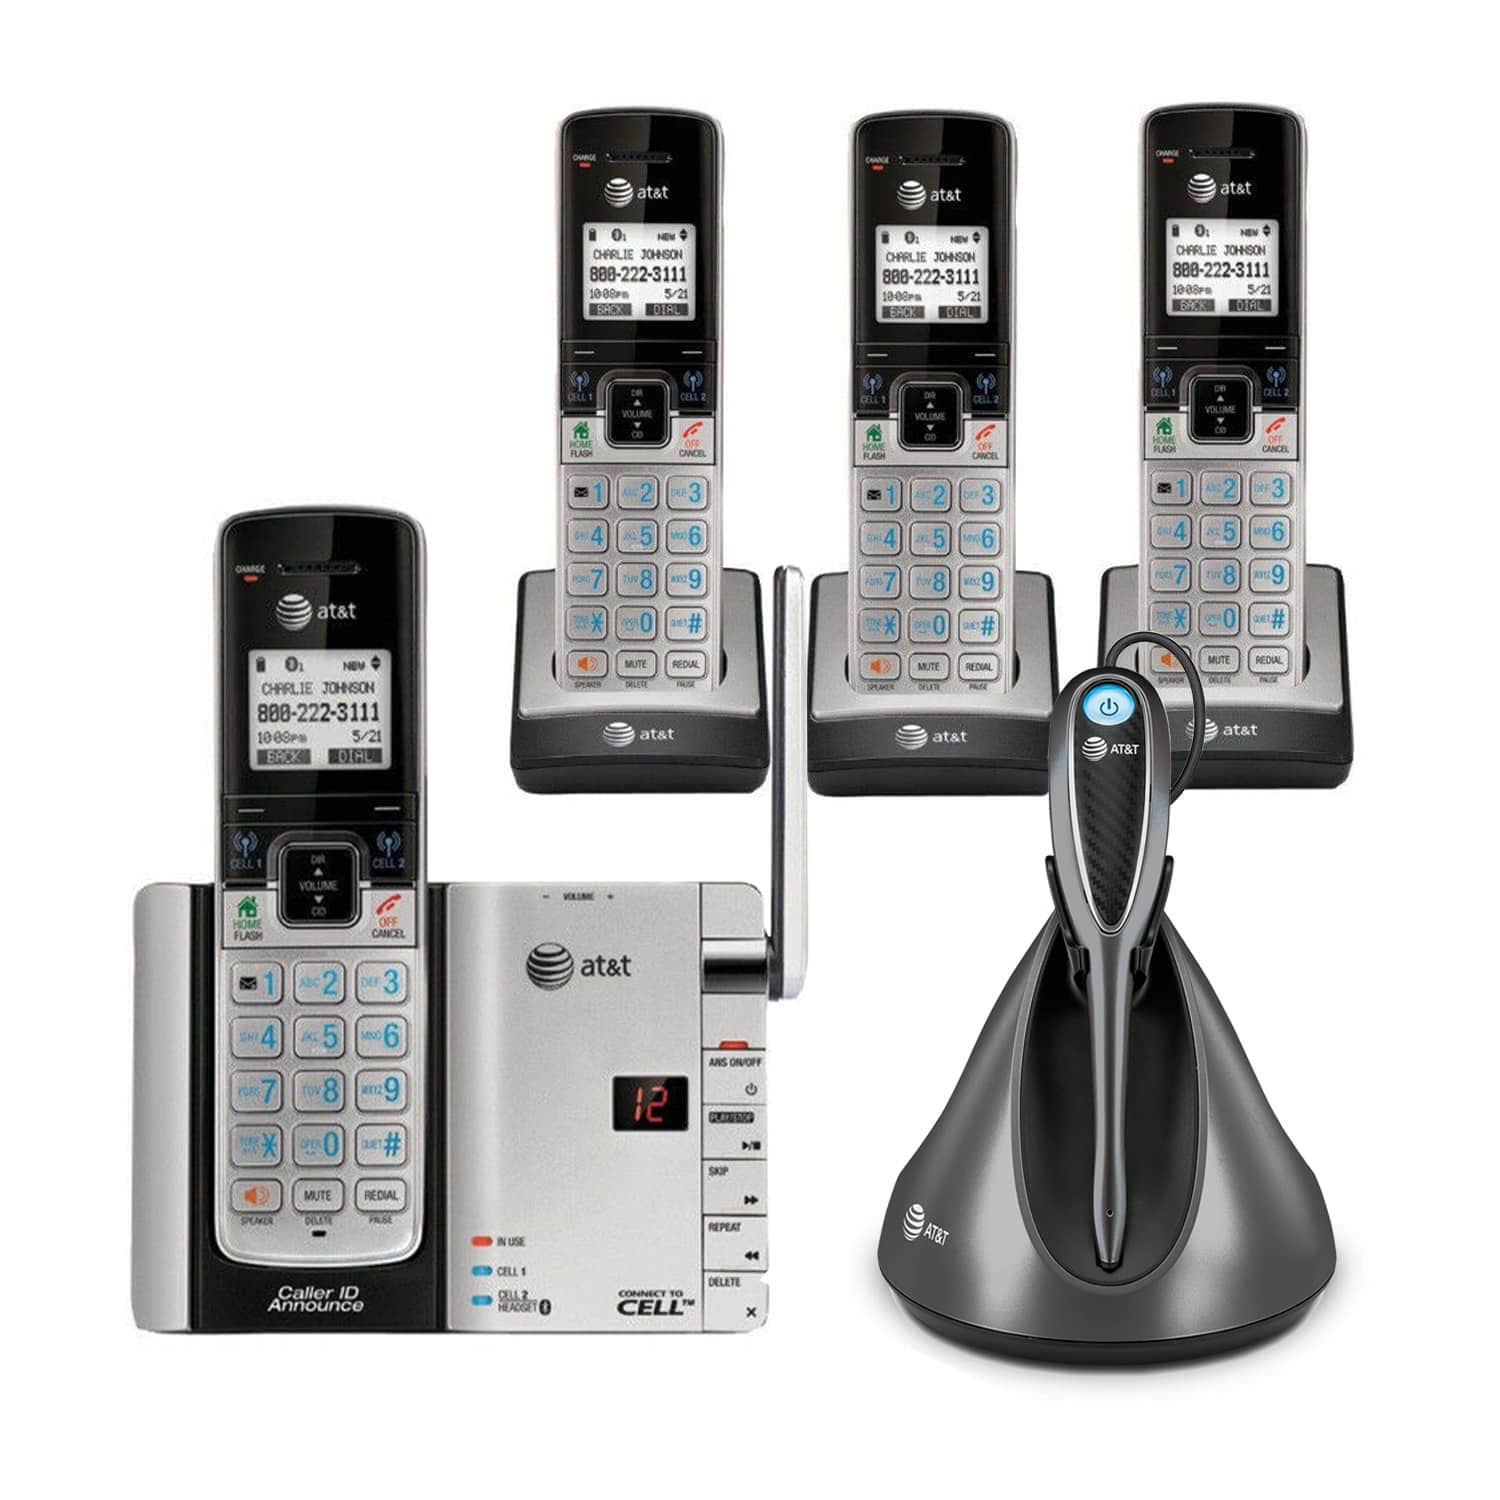 3 handset Connect to Cell™ answering system with cordless accessory headset - view 1